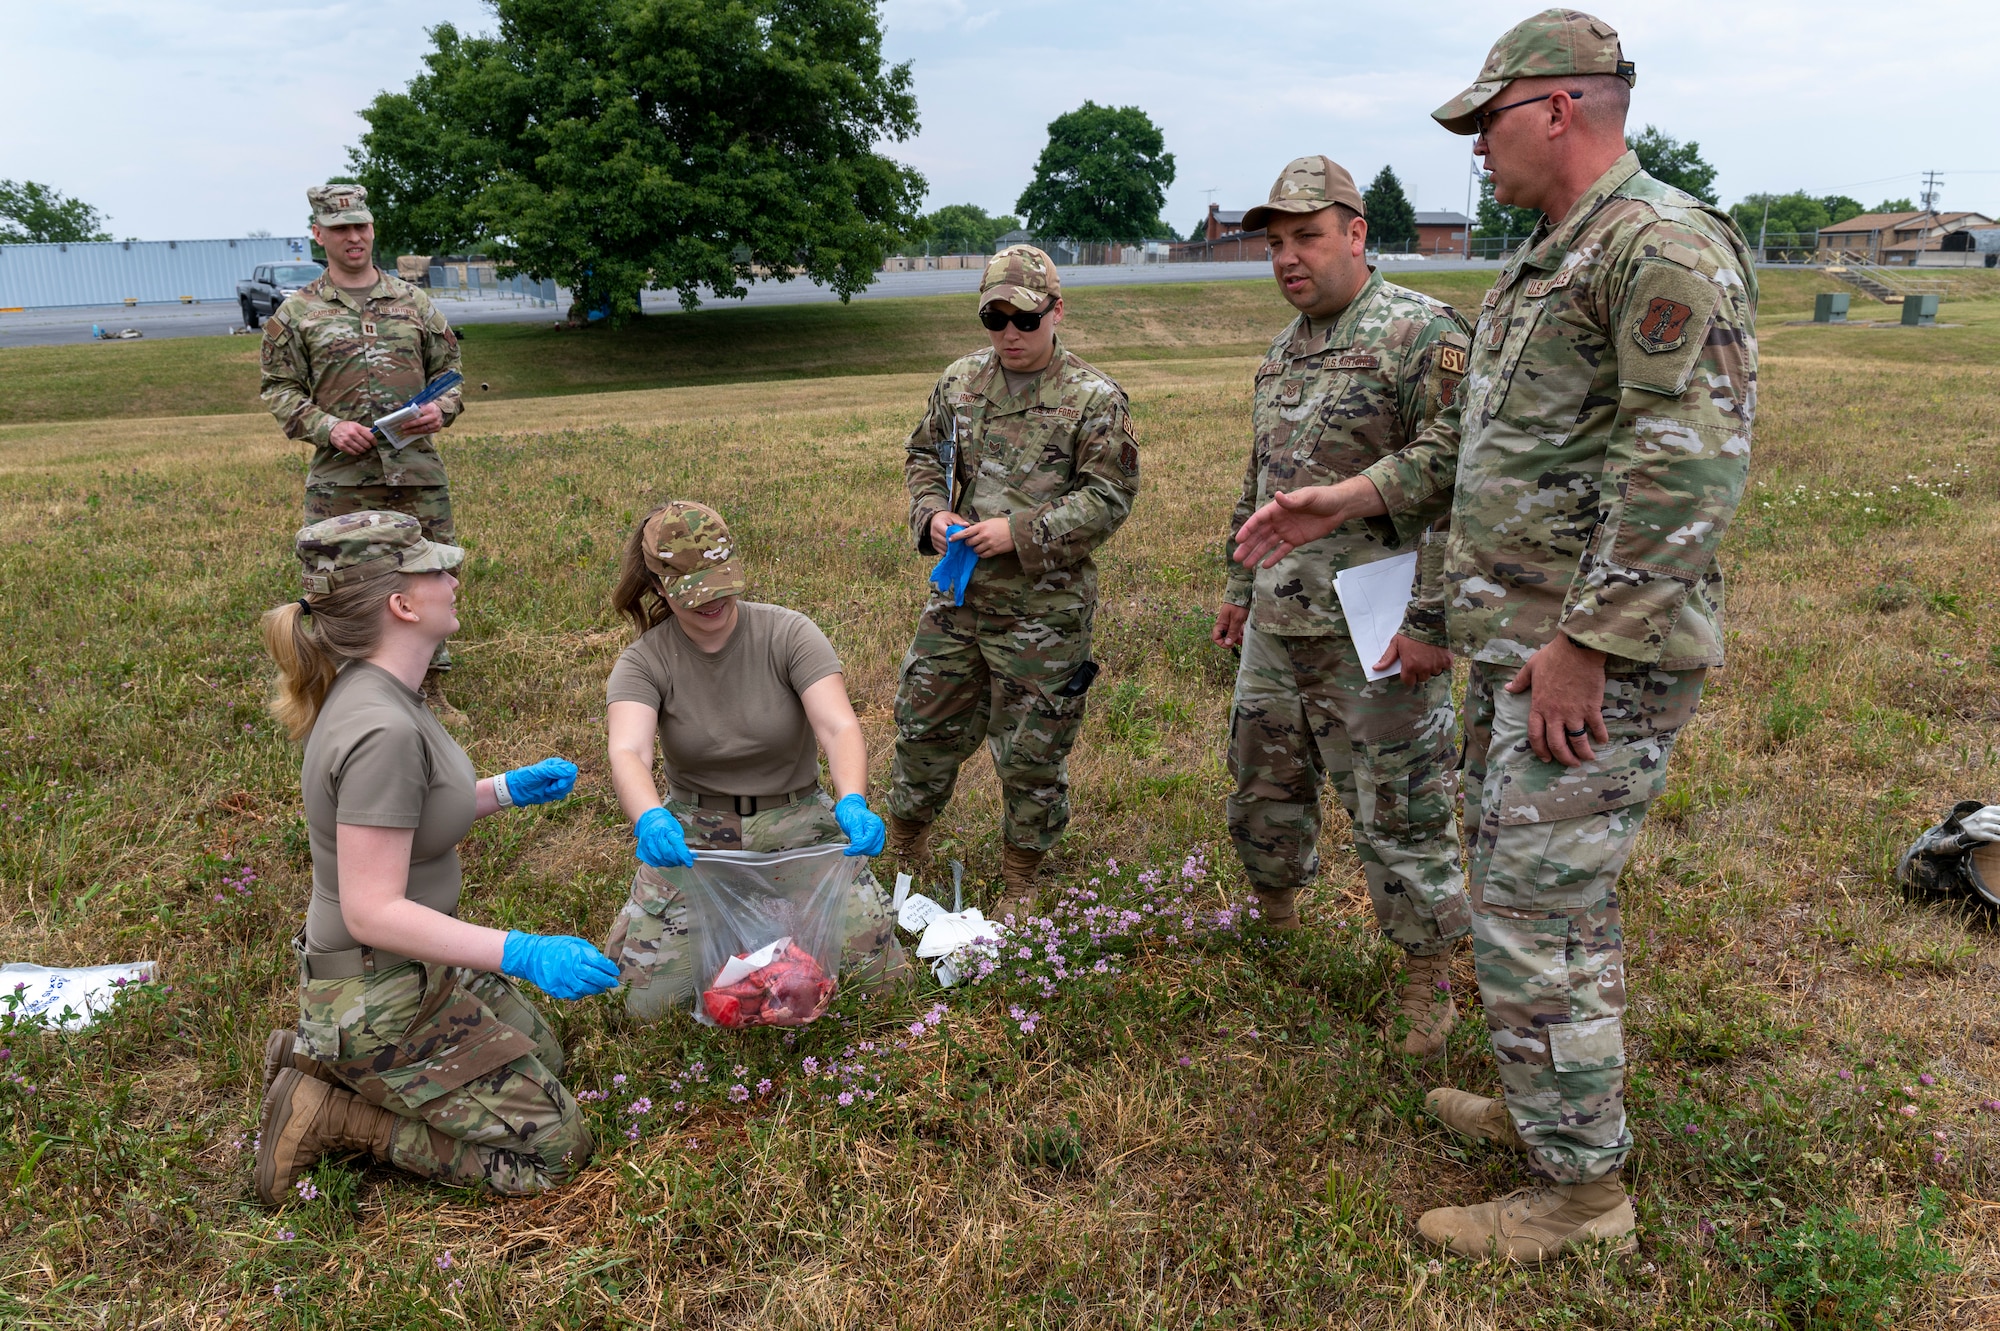 U.S. Air Force Senior Airman Charlize Wagner and Staff Sgt. Haylee Marshall, 167th Force Support Squadron services specialists, recover simulated human remains while observed by other members of 167th FSS during a search and recovery training event at the 167th Airlift Wing, Martinsburg, West Virginia, June 9, 2023.